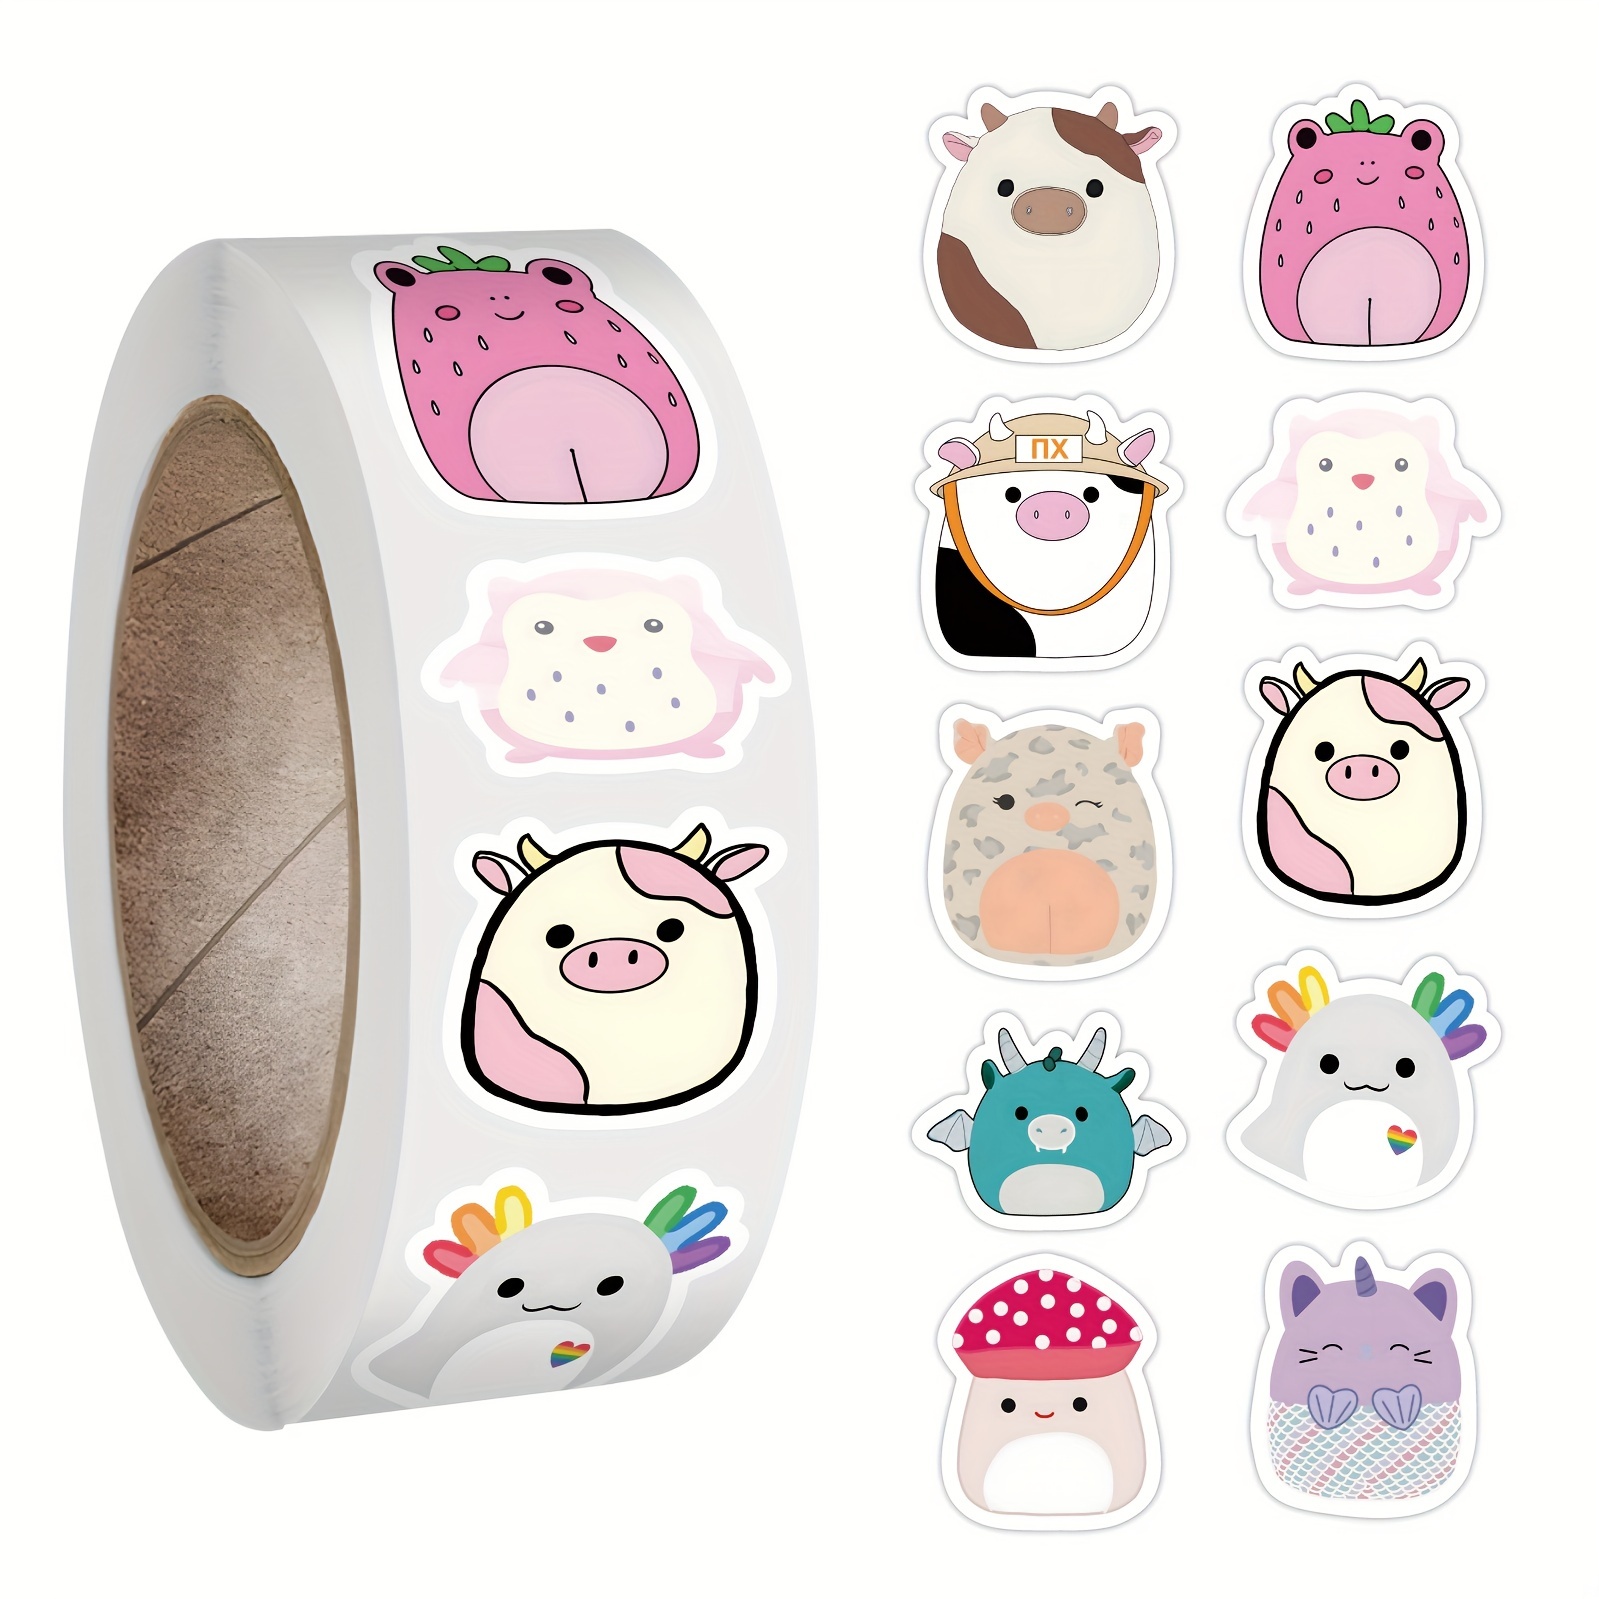 500pcs Cute Animal Stickers Roll Cute Stuffed Animal Stickers For ...